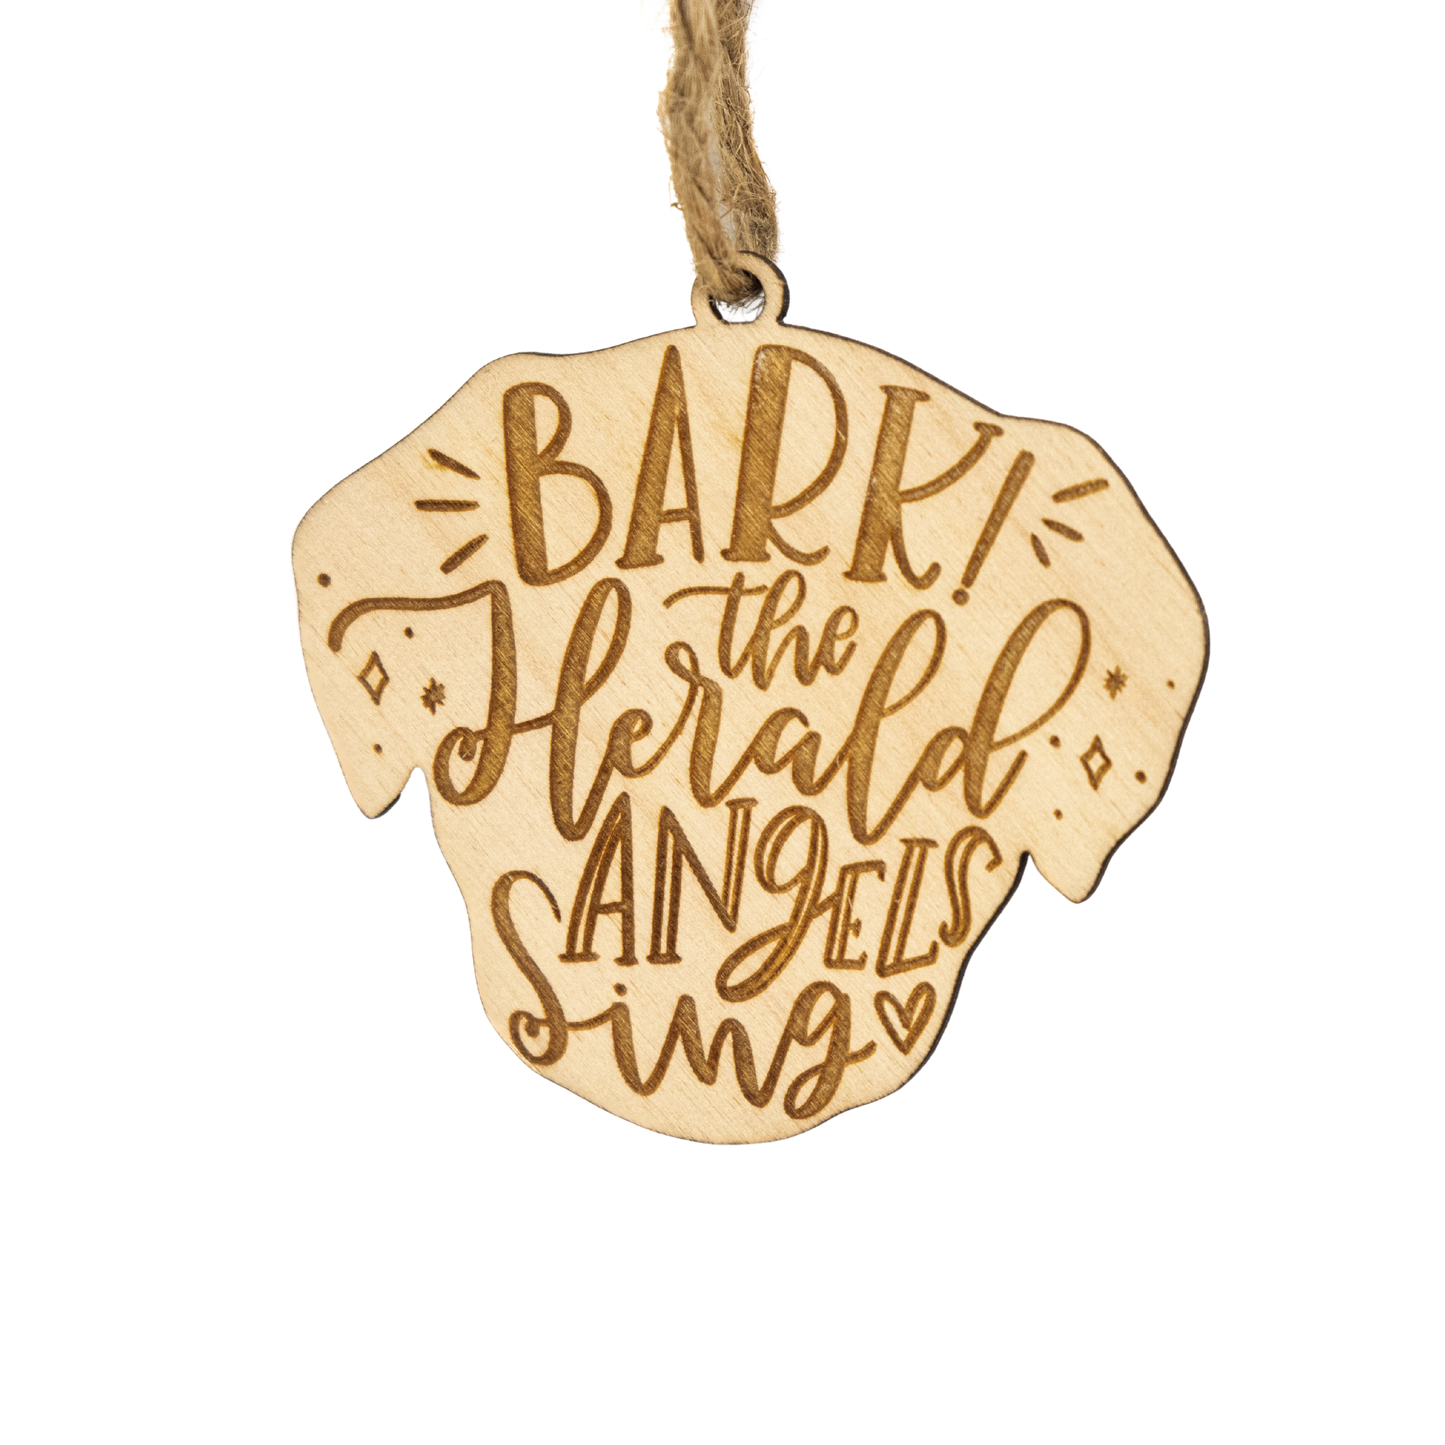 Bark The Herald Angels Sing Ornament